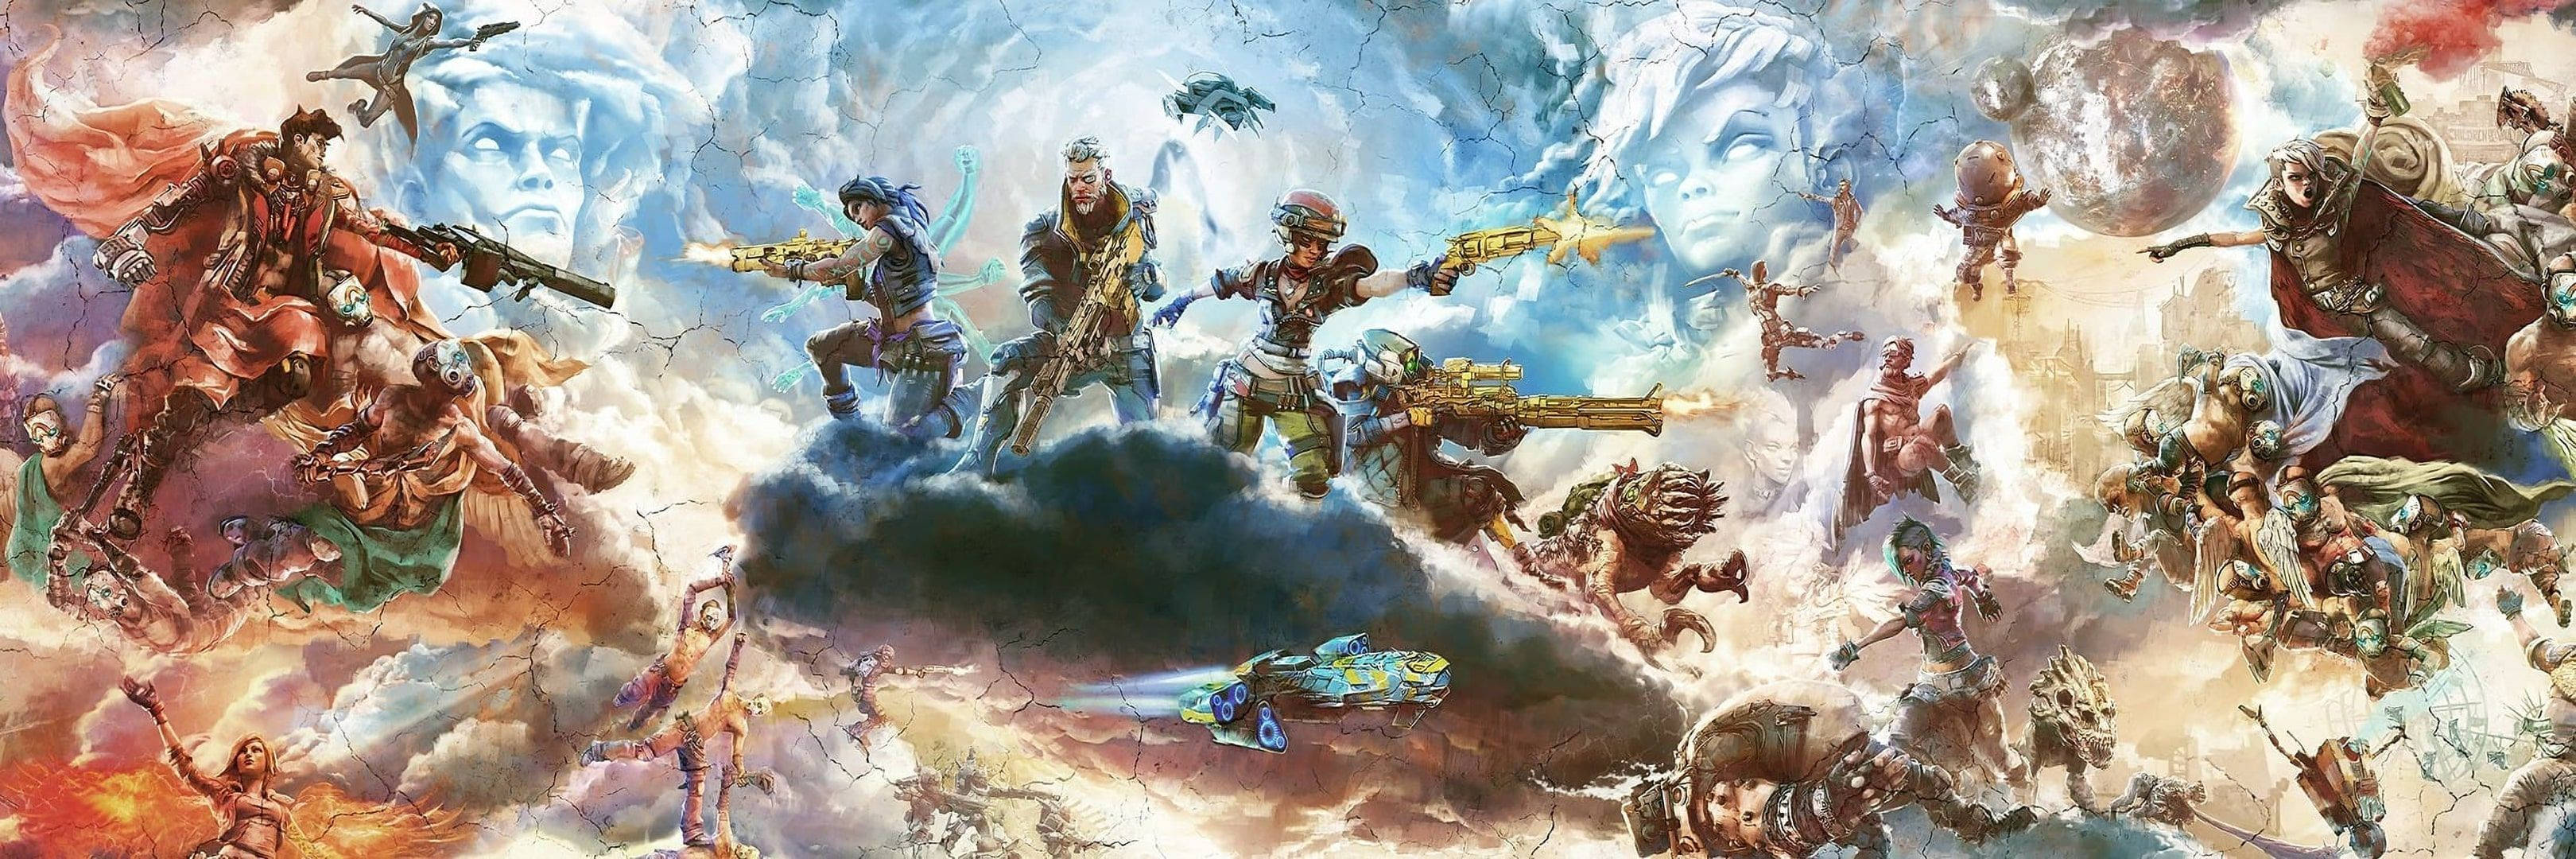 3240X1080 Borderlands 3 Wallpaper and Background